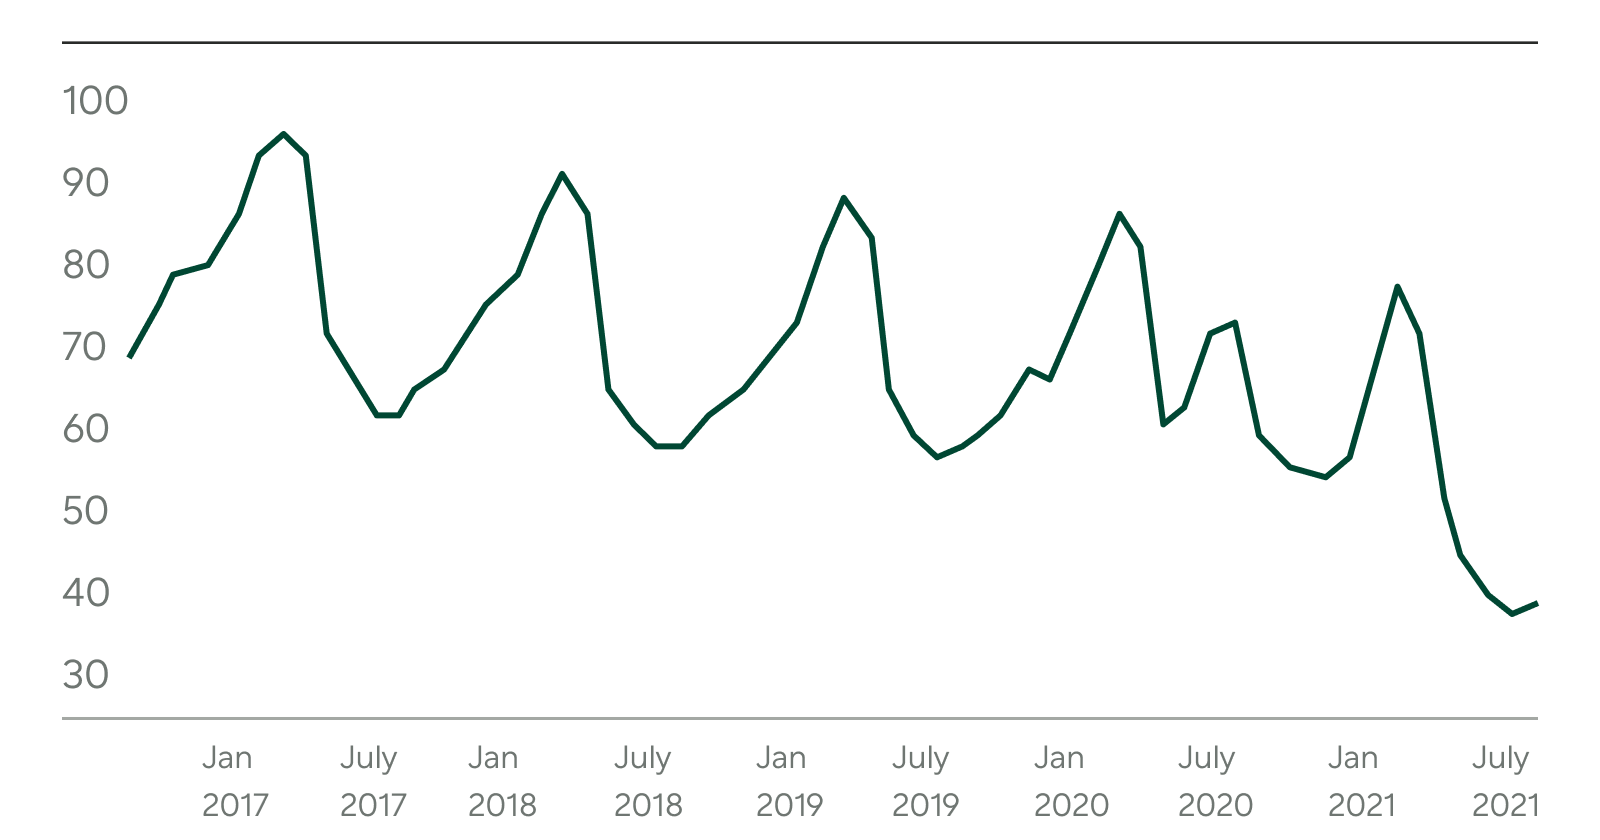 Trend lines graph of average days houses are on market in the US from January 2017 to July 2021